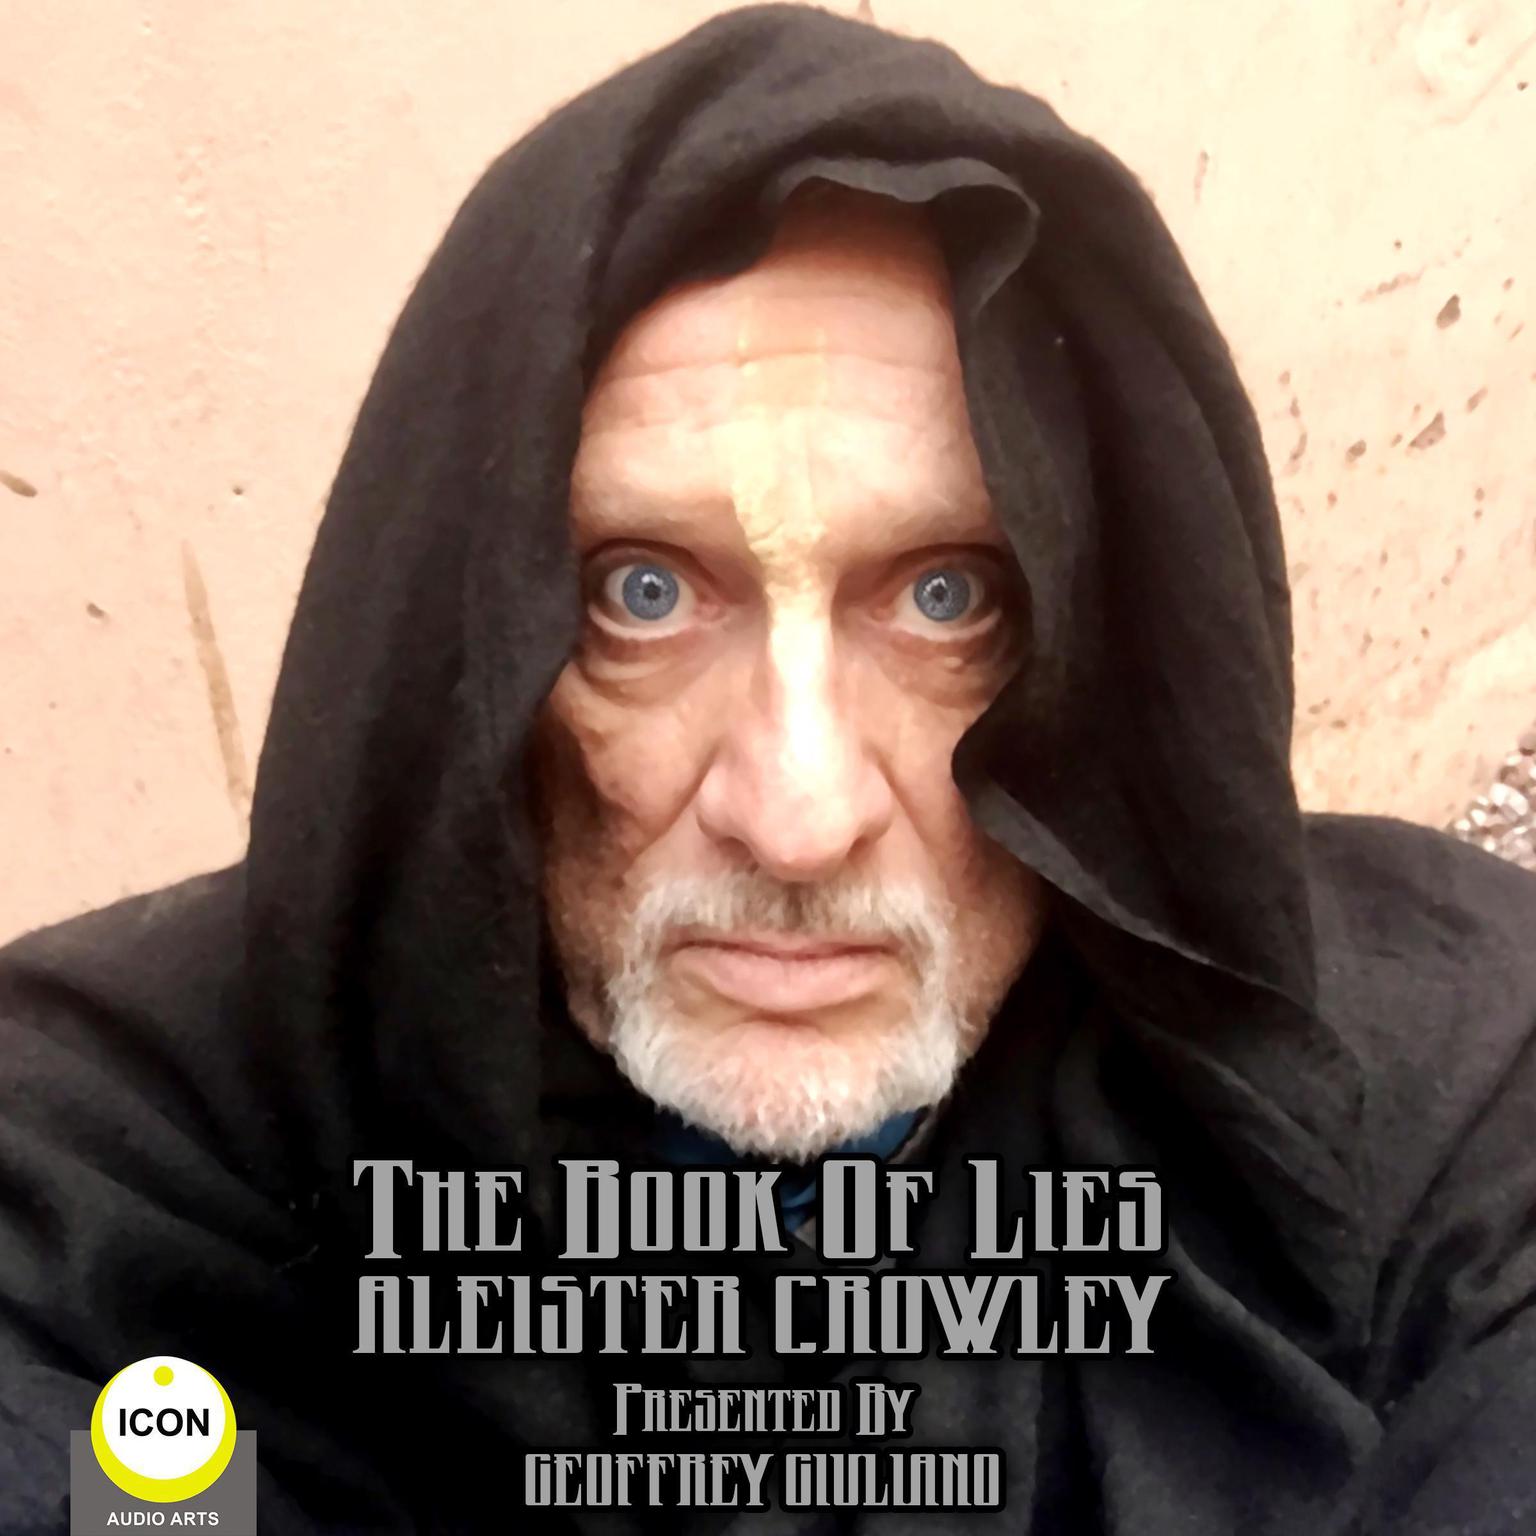 The Book Of Lies Aleister Crowley Audiobook, by Aleister Crowley